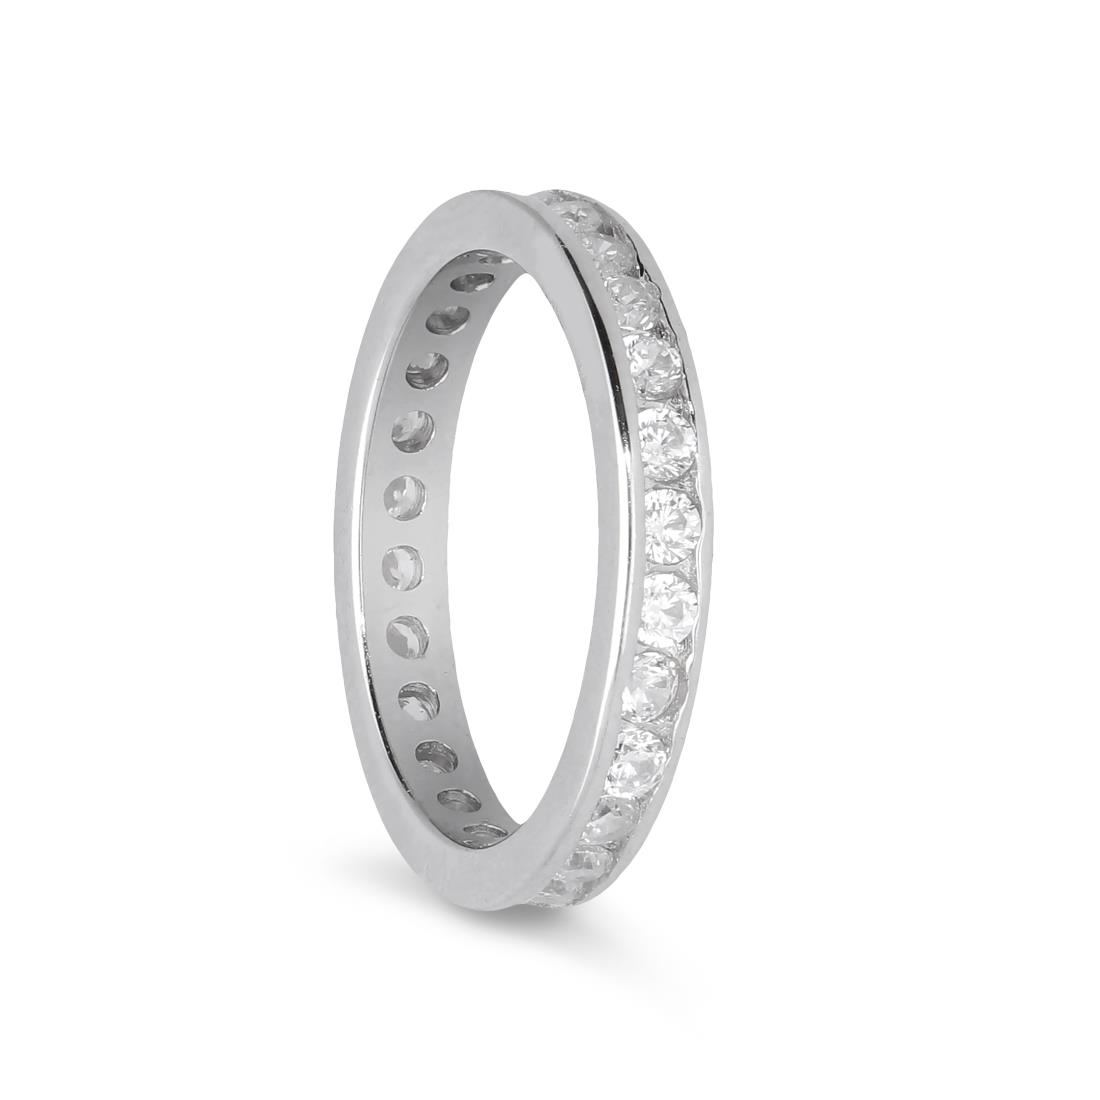 Eternity ring in silver and zircons - ORO&CO 925